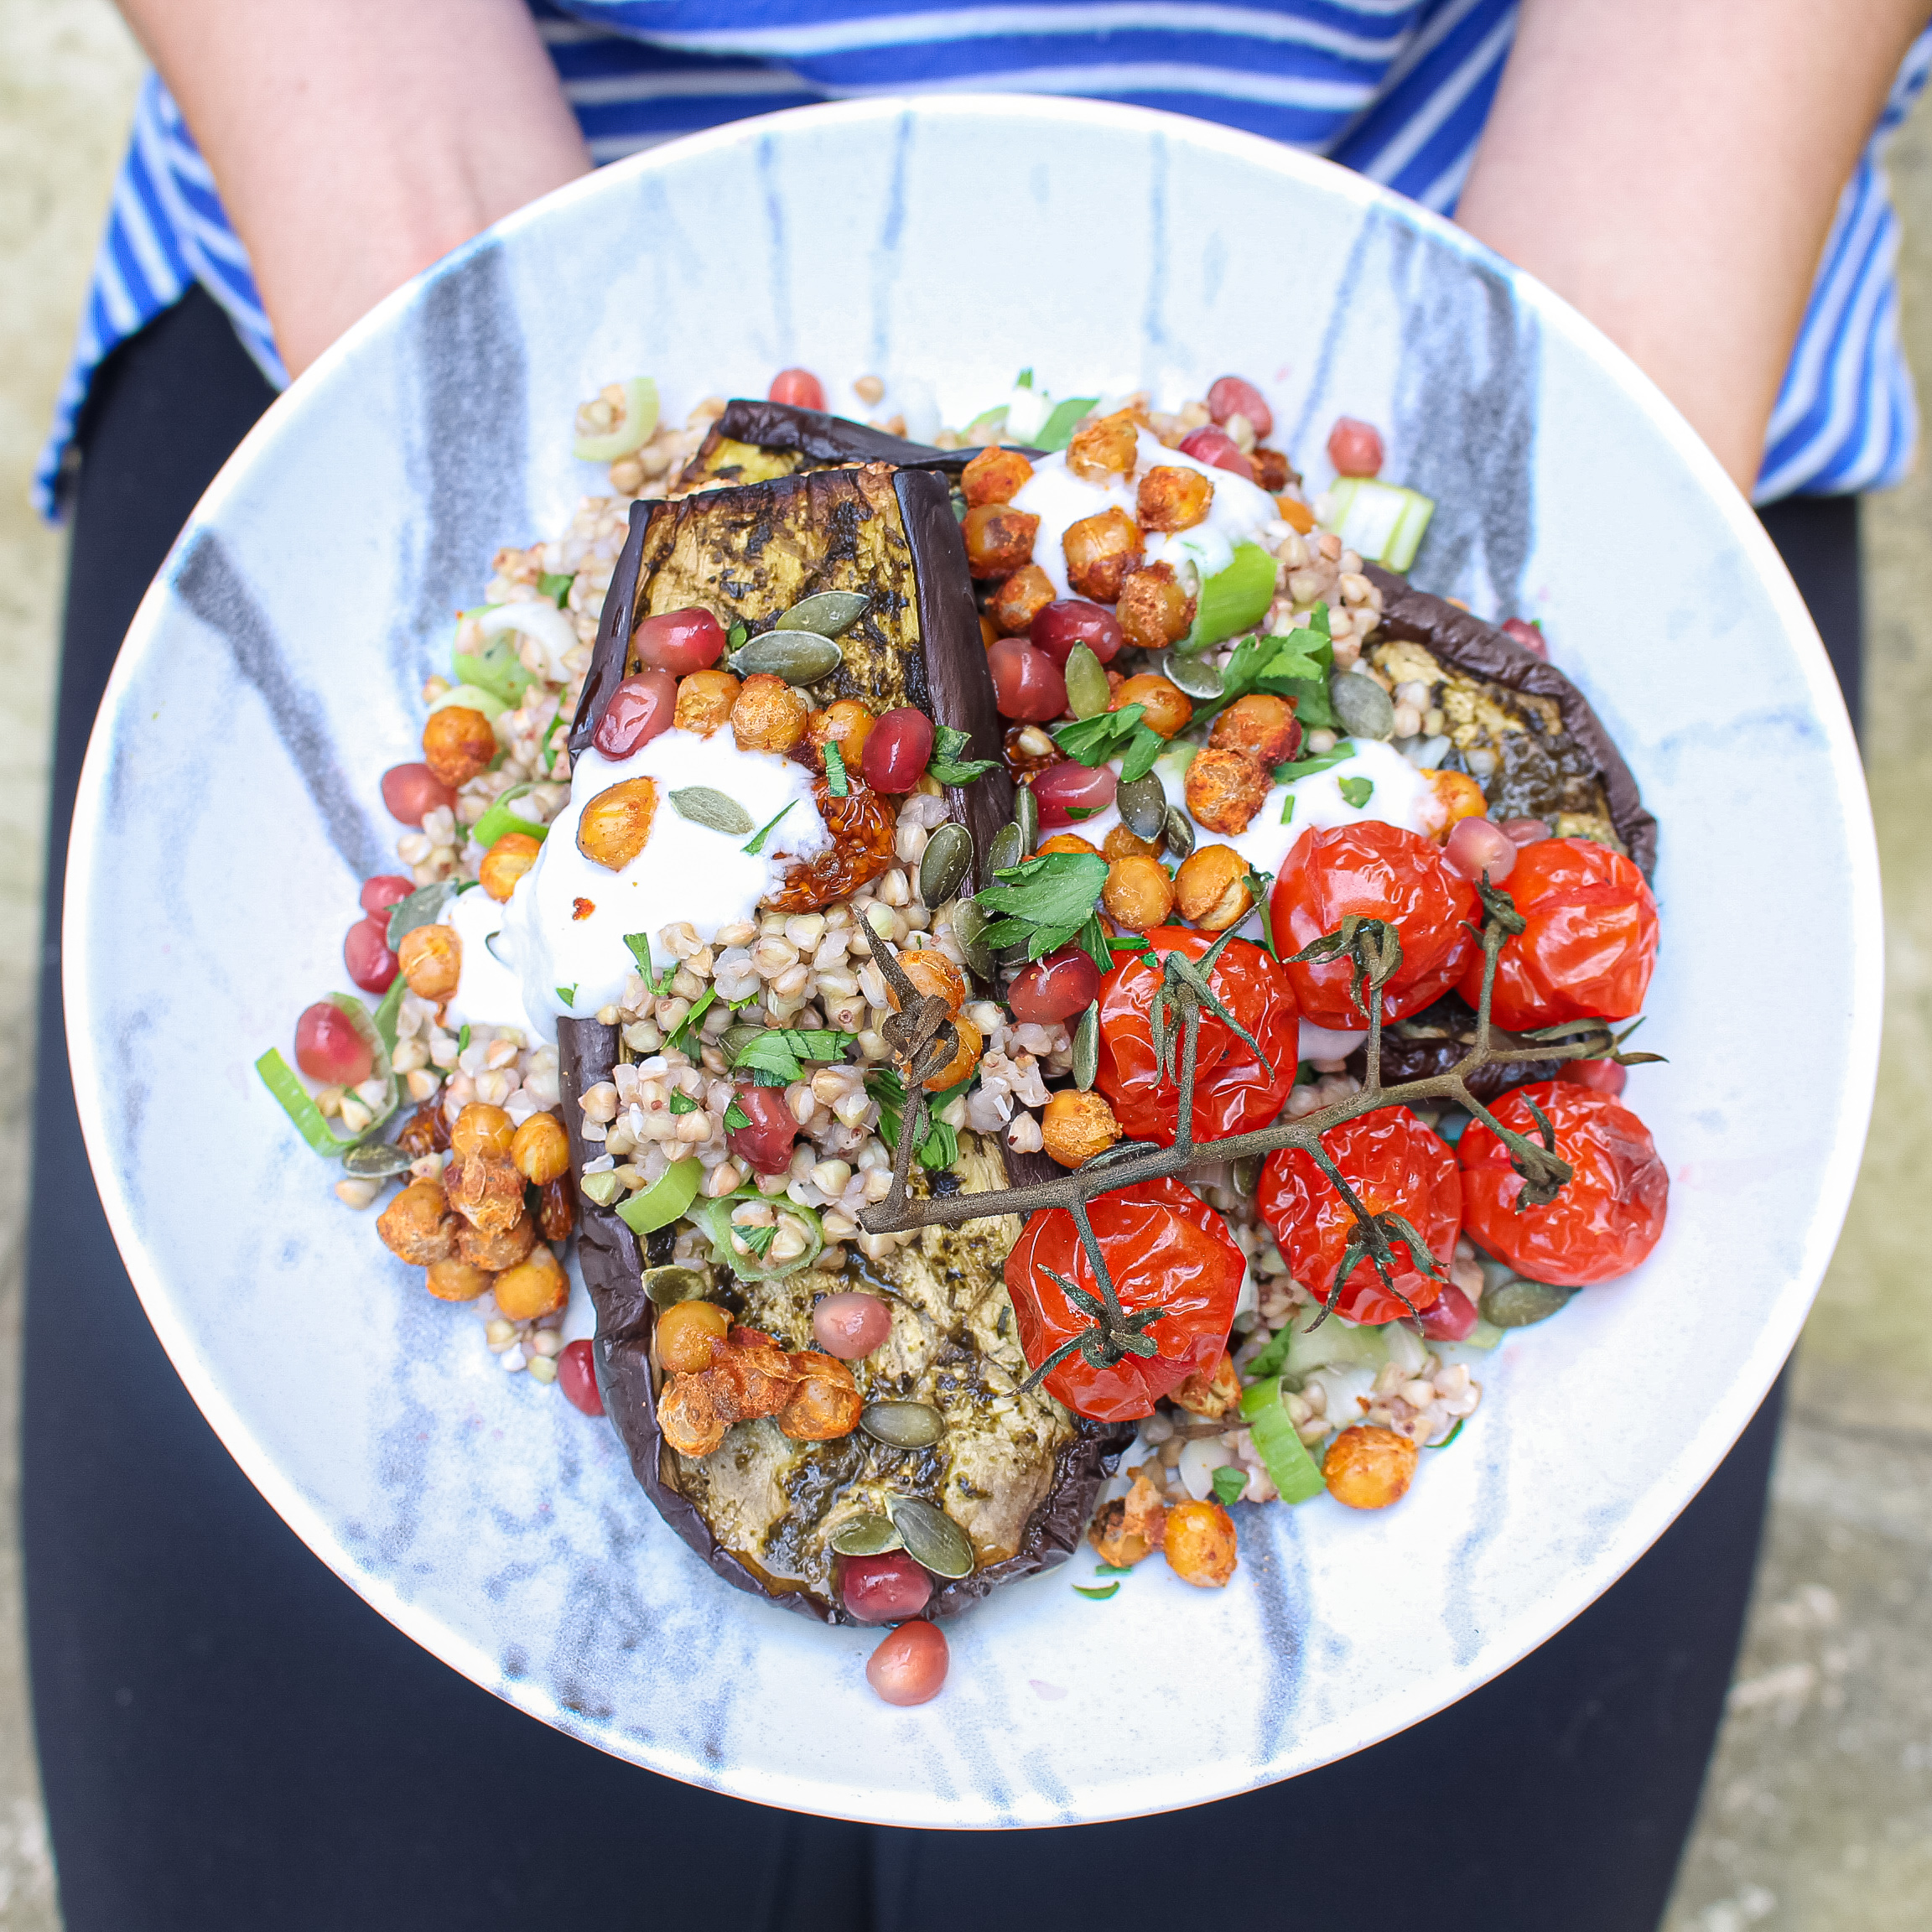 Zhoug Roasted Aubergines with Crunchy Chickpeas and a Goldenberry Pumpkin Seed Buckwheat Salad